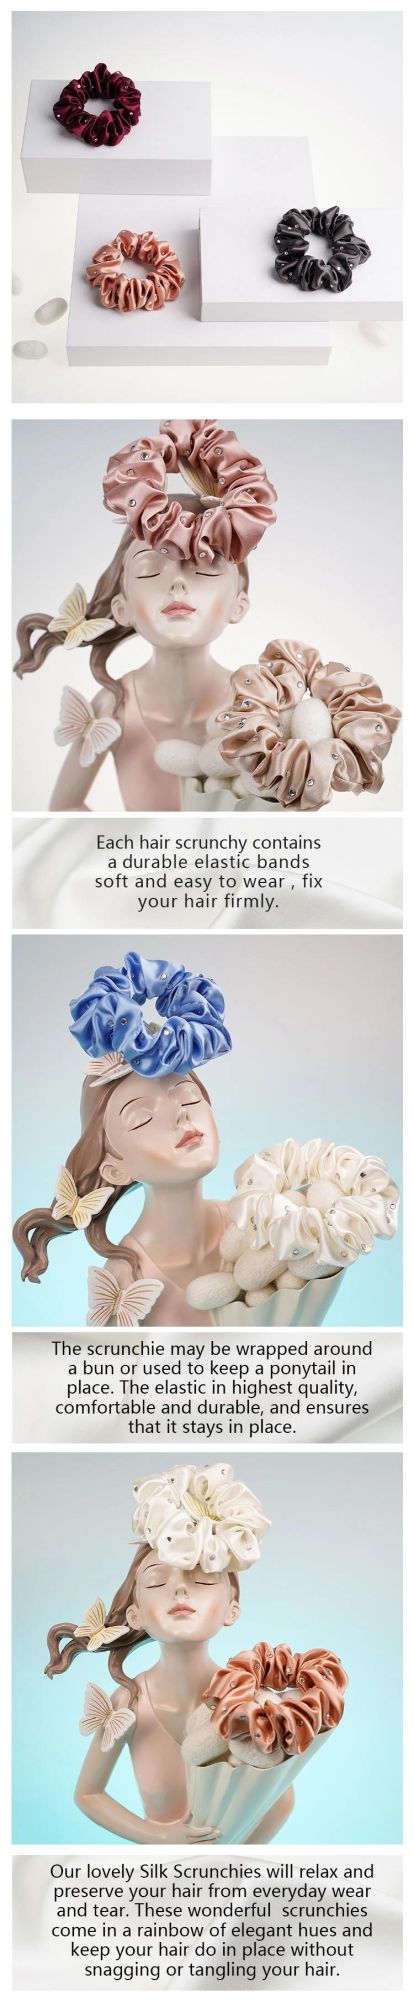 Hot Drills Silk Scrunchies for Hair Accessories with High Quality